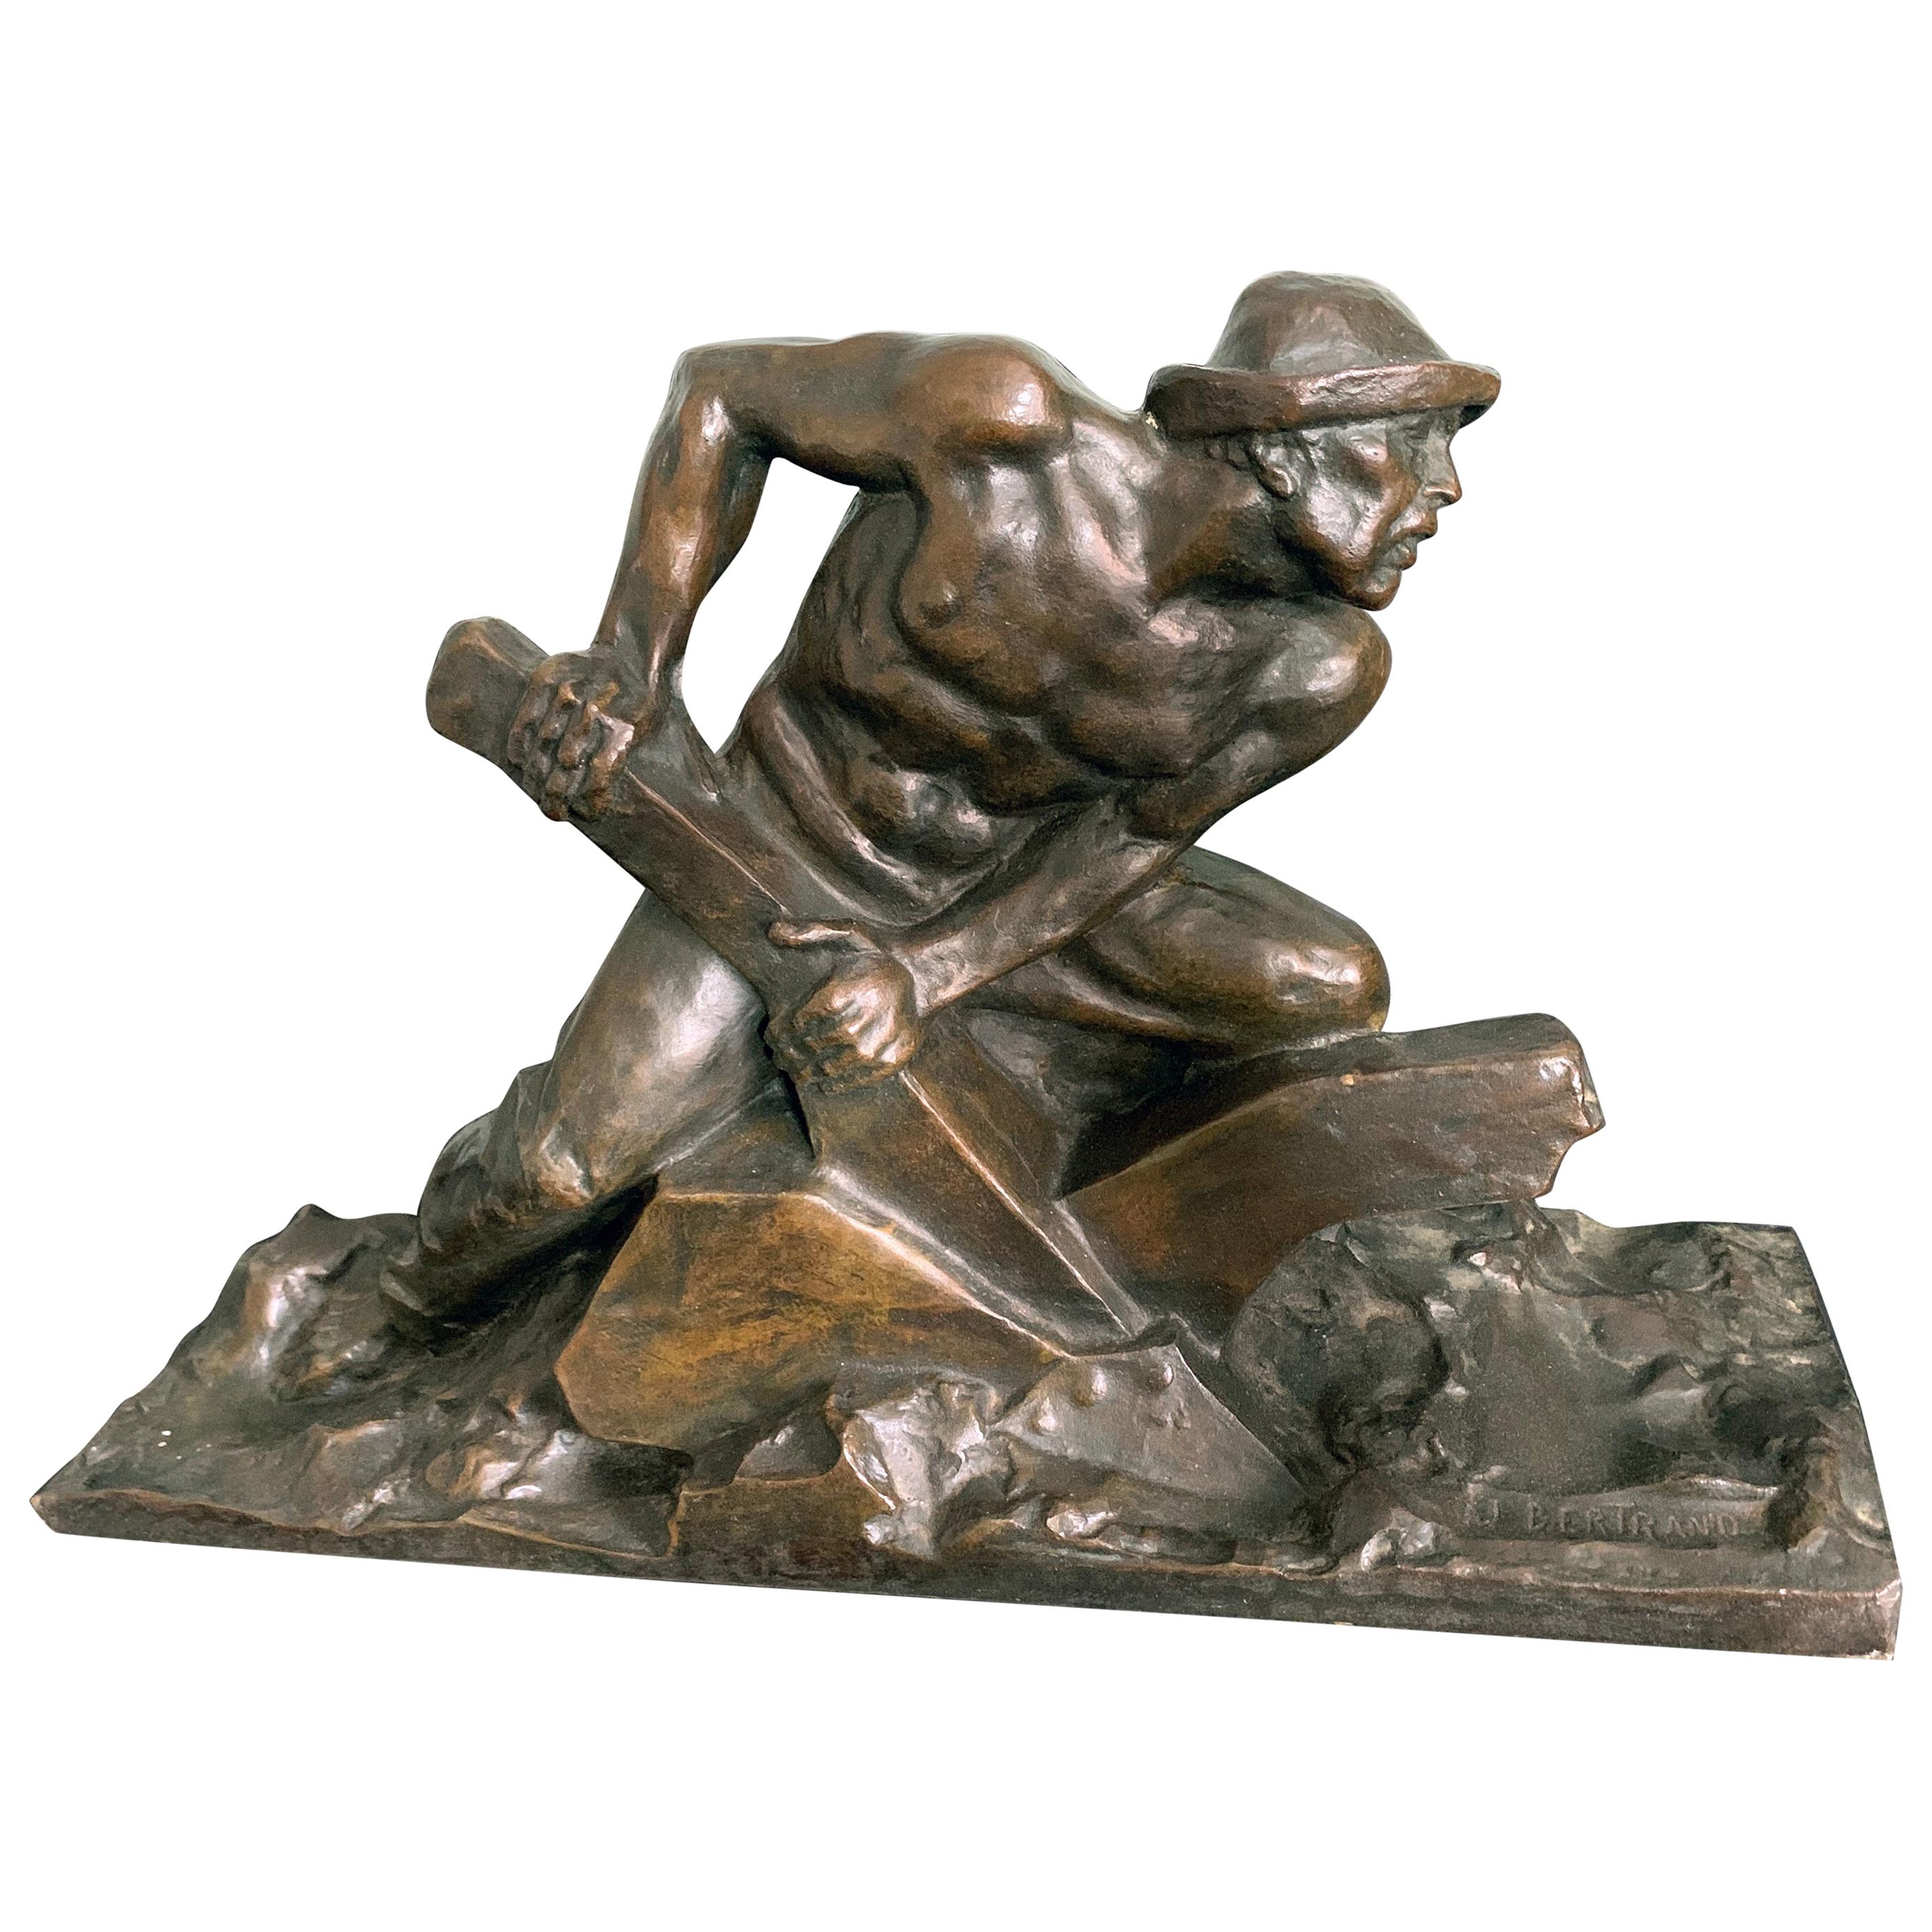 "Driving the Plow, " Large, Powerful Bronze Sculpture with Half-Nude Male Figure For Sale